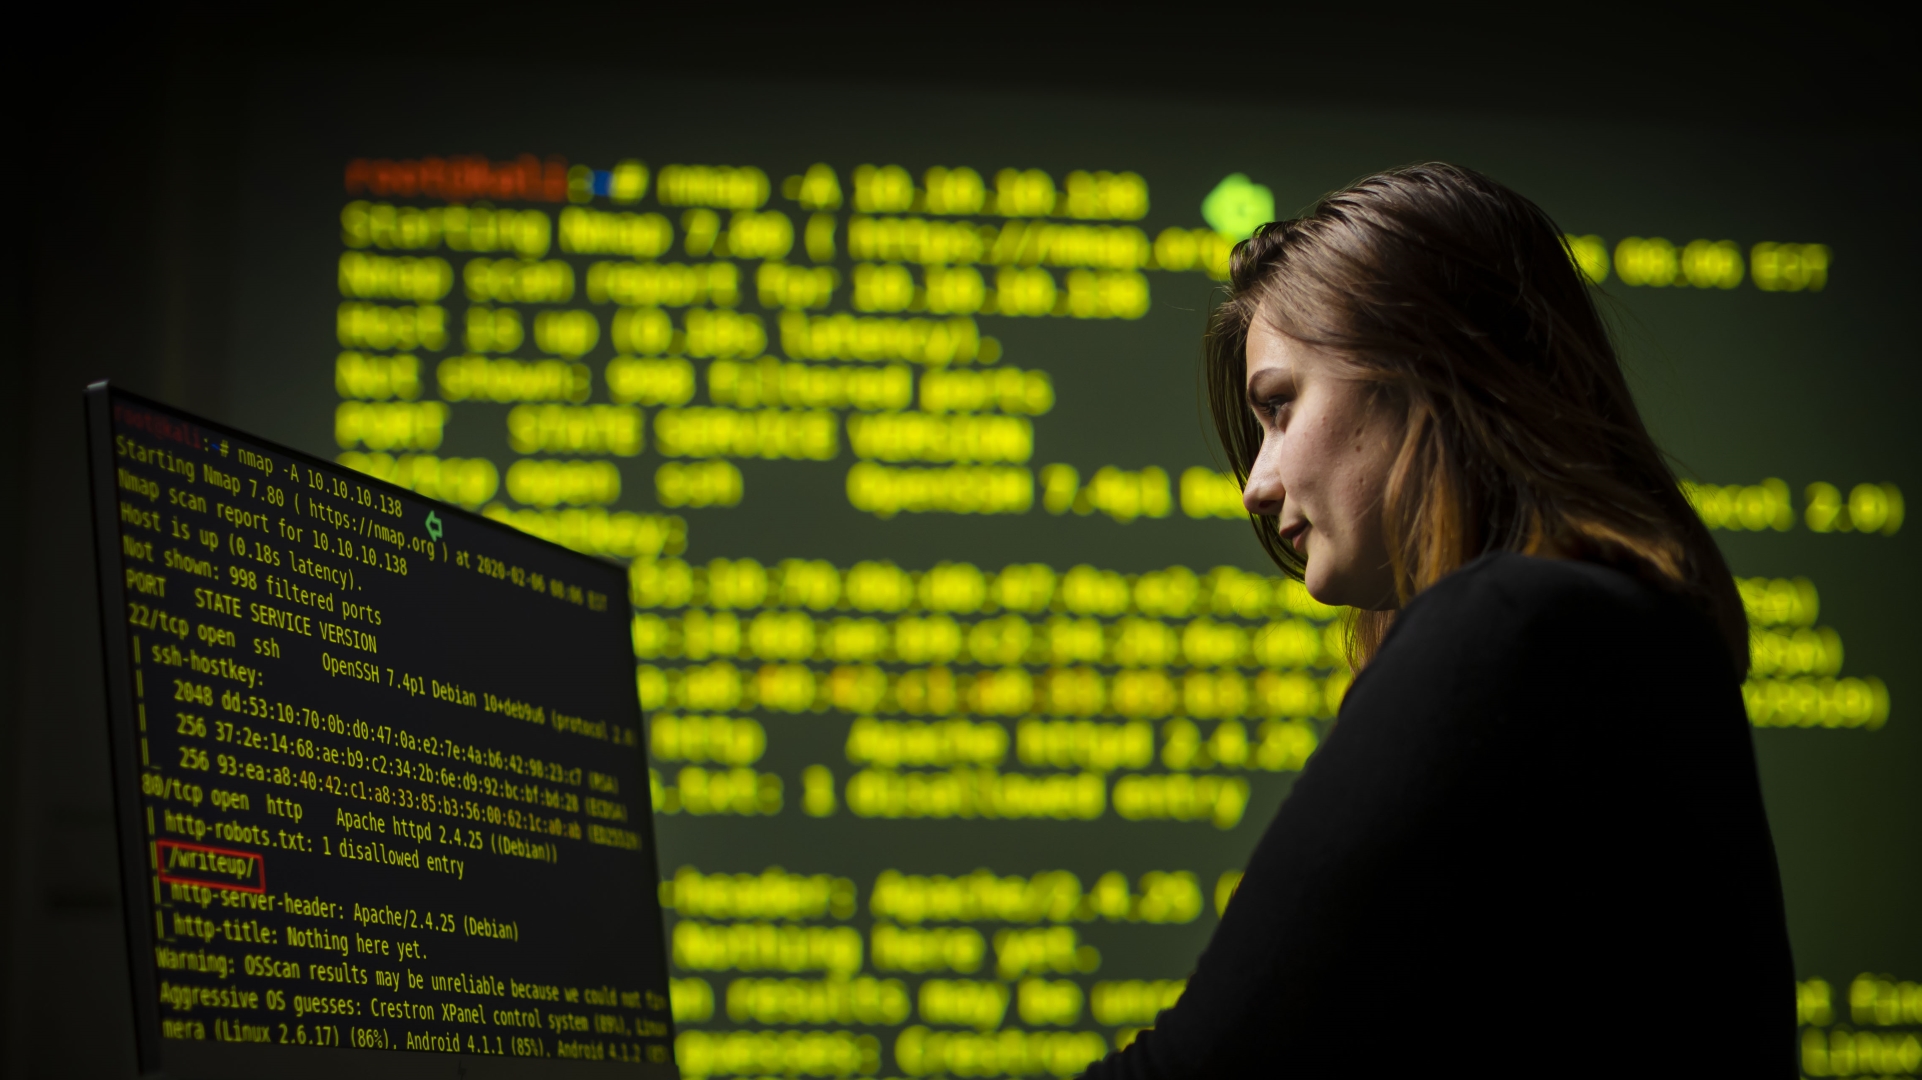 Woman looking down at computer screen with large screen in background showing lines of text